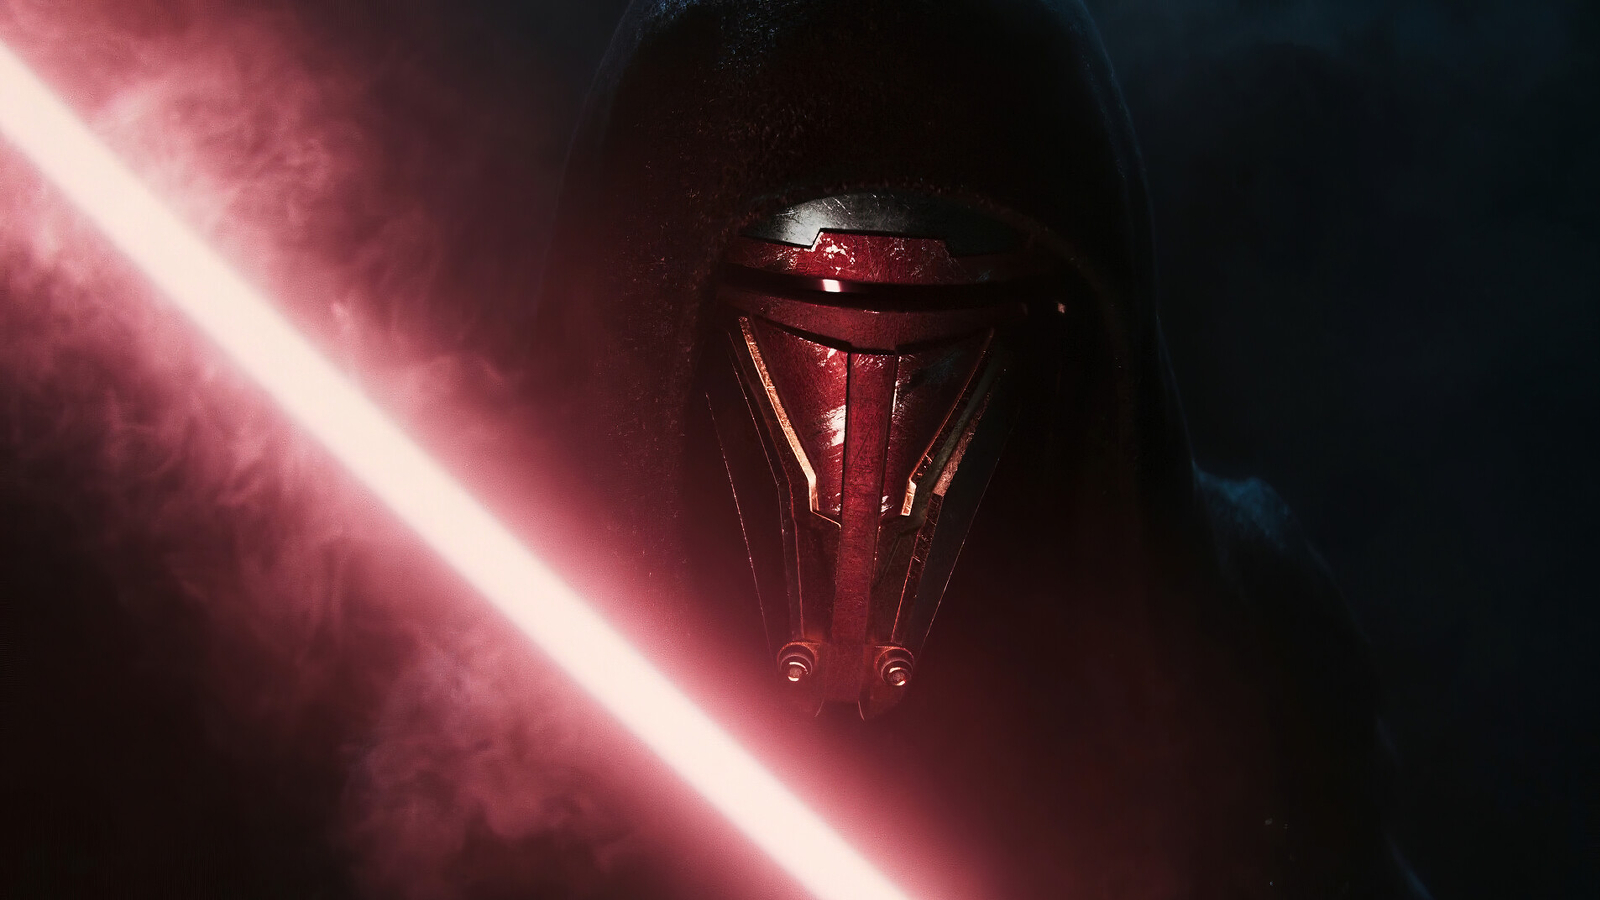 Artwork of Star Wars character Darth Revan wearing his facemask with his red lightsaber ignited